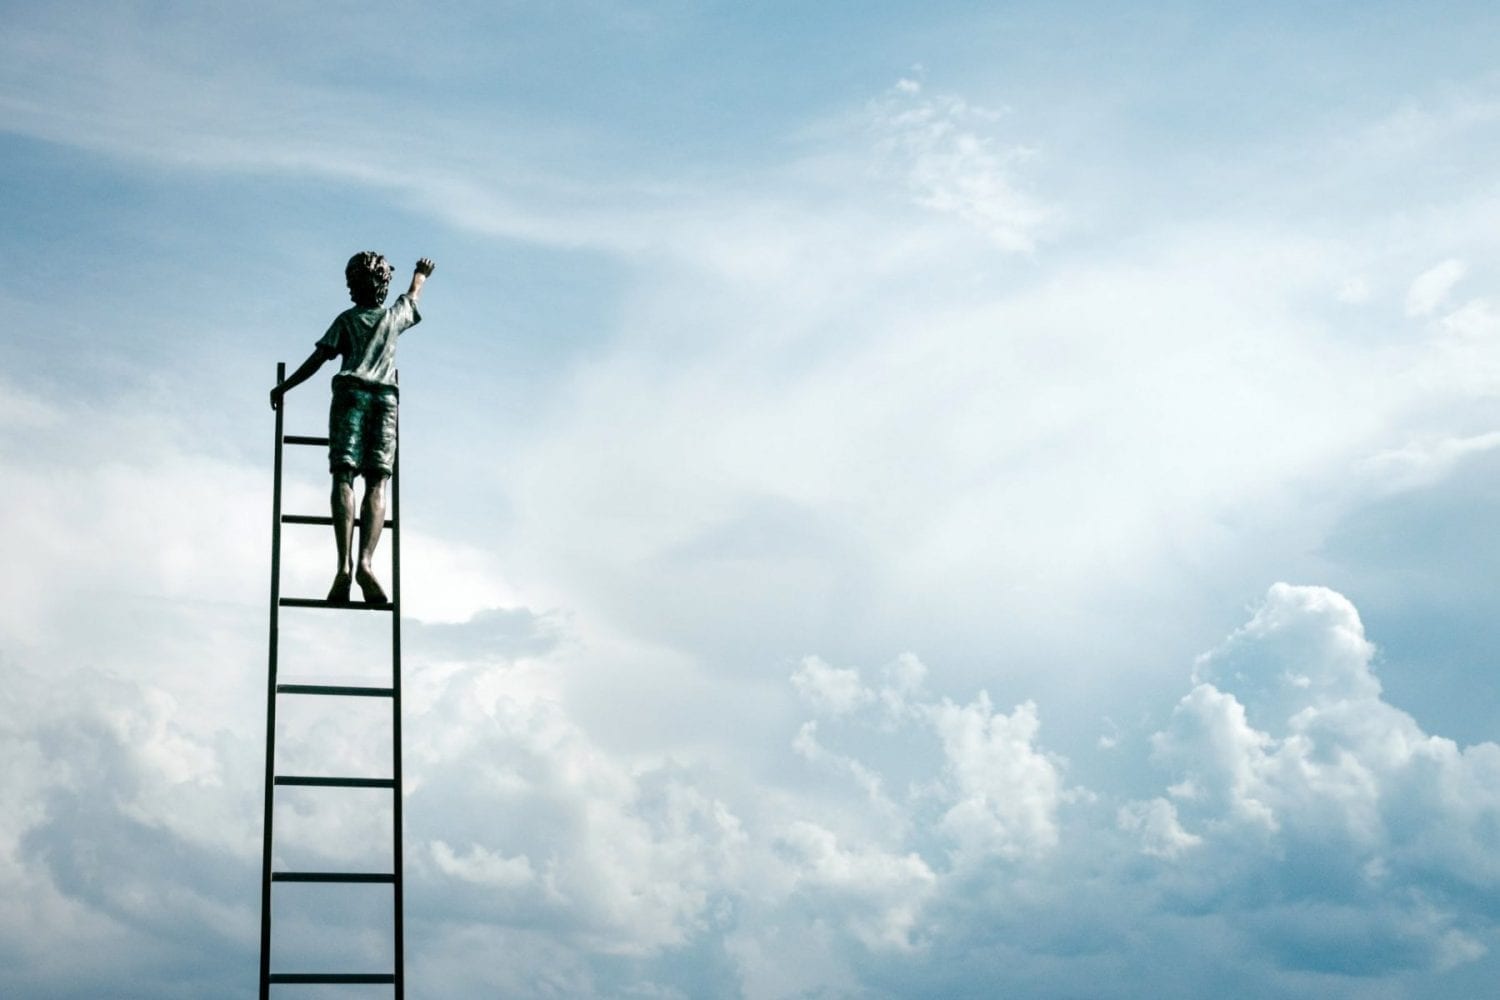 A child climbing a ladder reaching for the sky